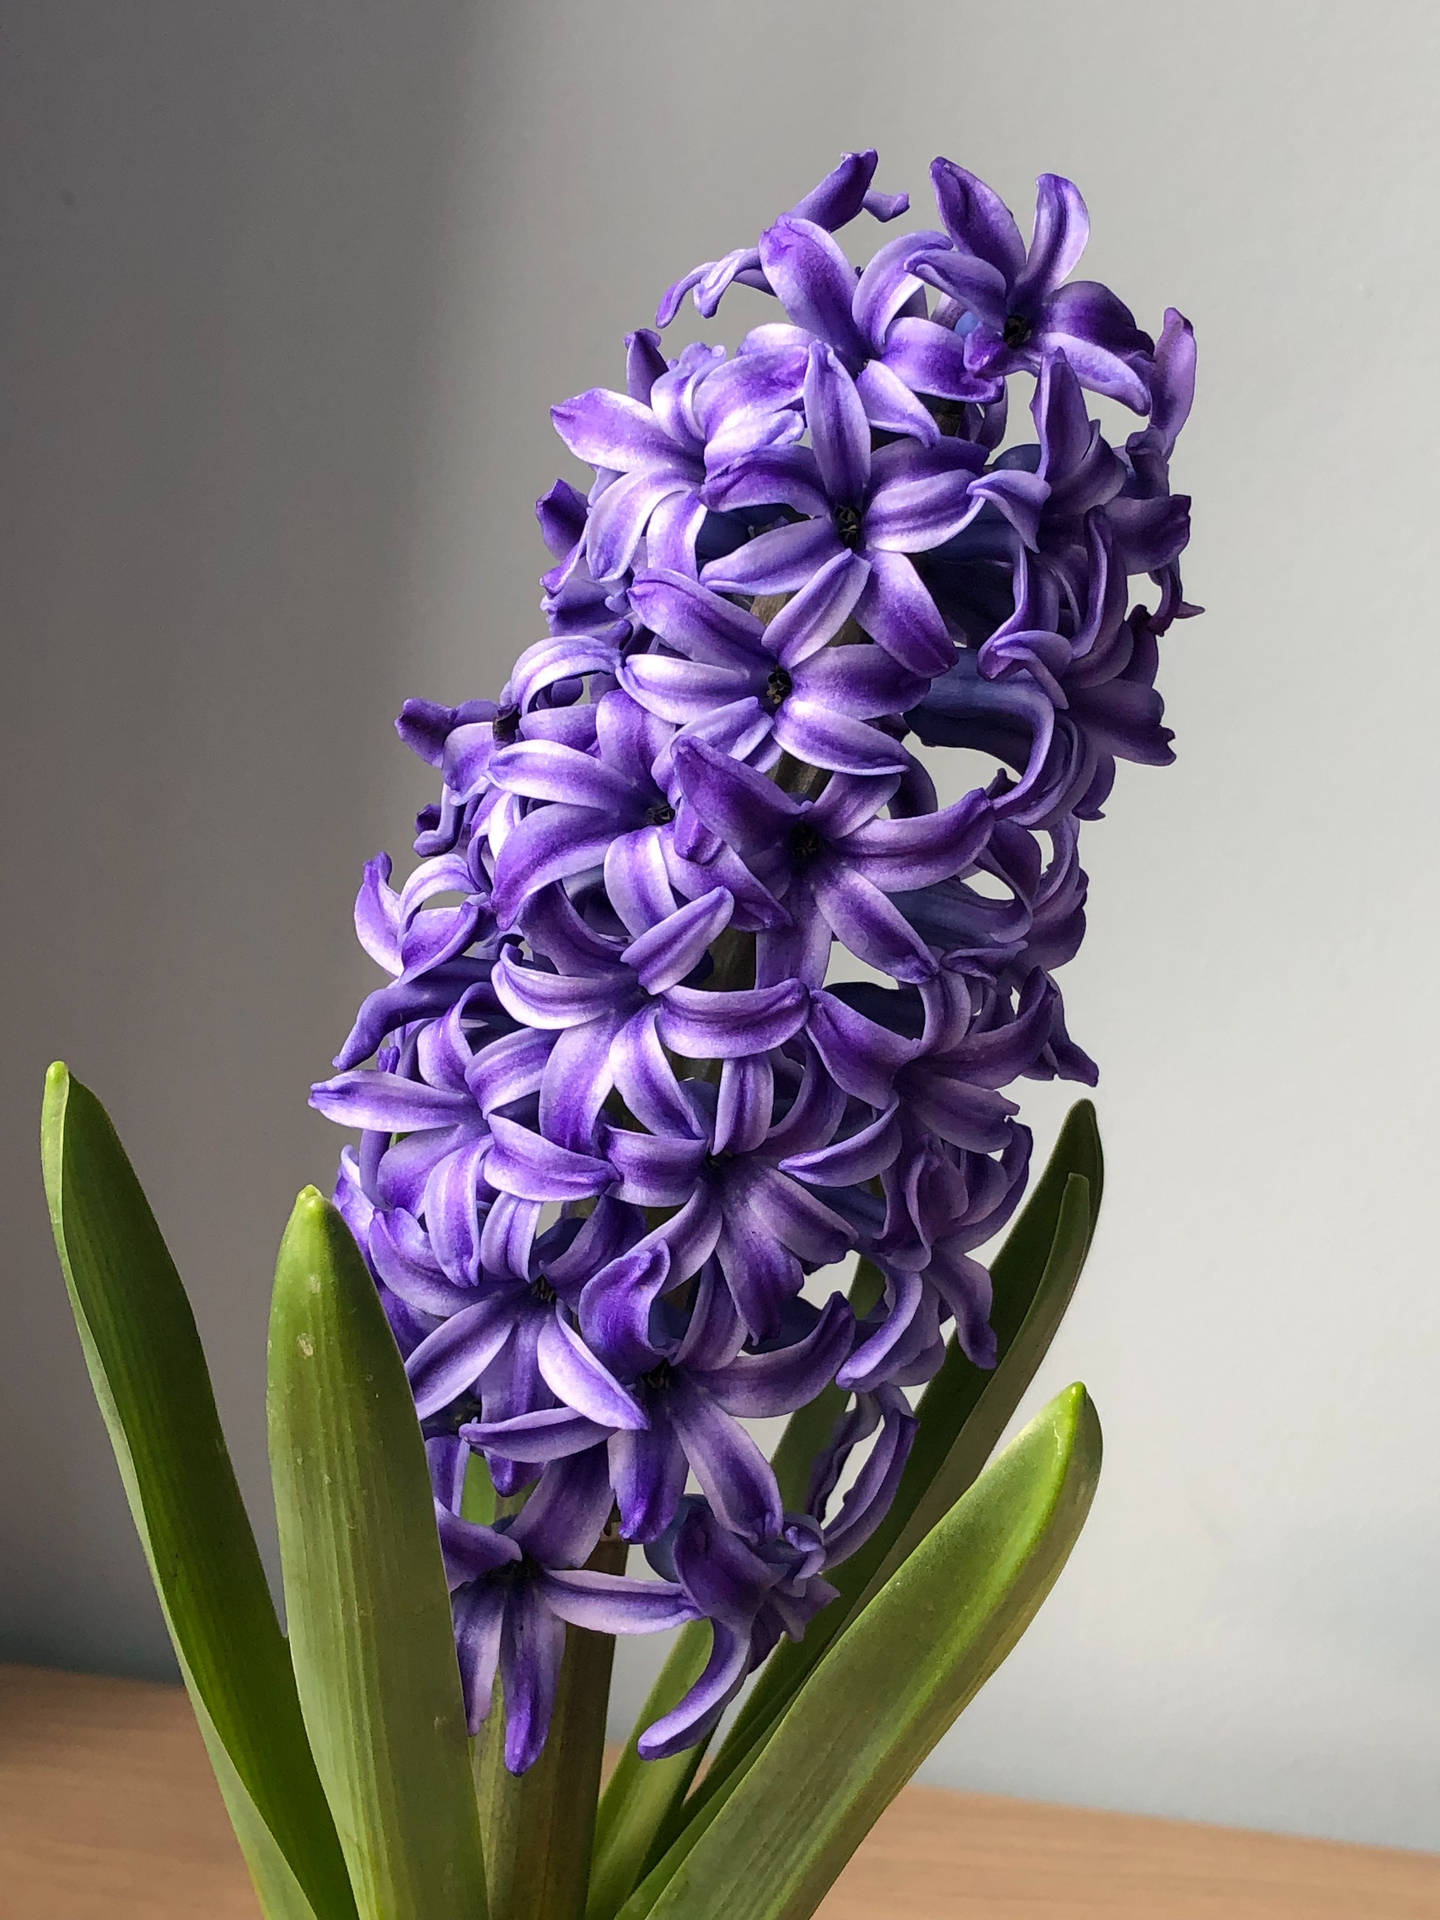 Lilla Hyacinth Blomst Android Wallpaper